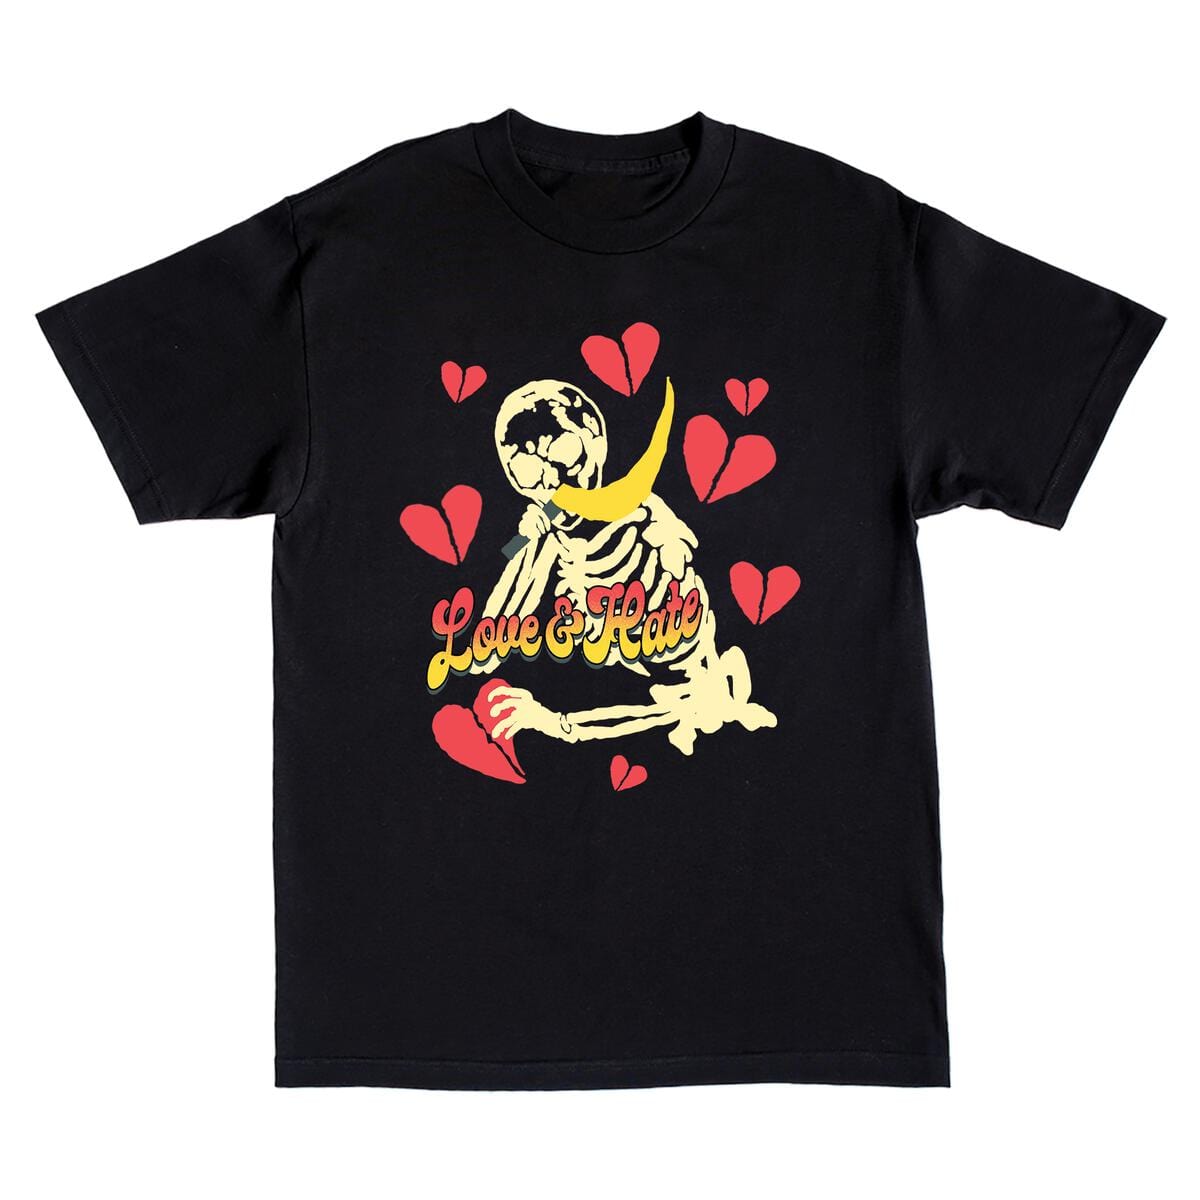 LONLY HEARTS T SHIRT Love & Hate T-shirt